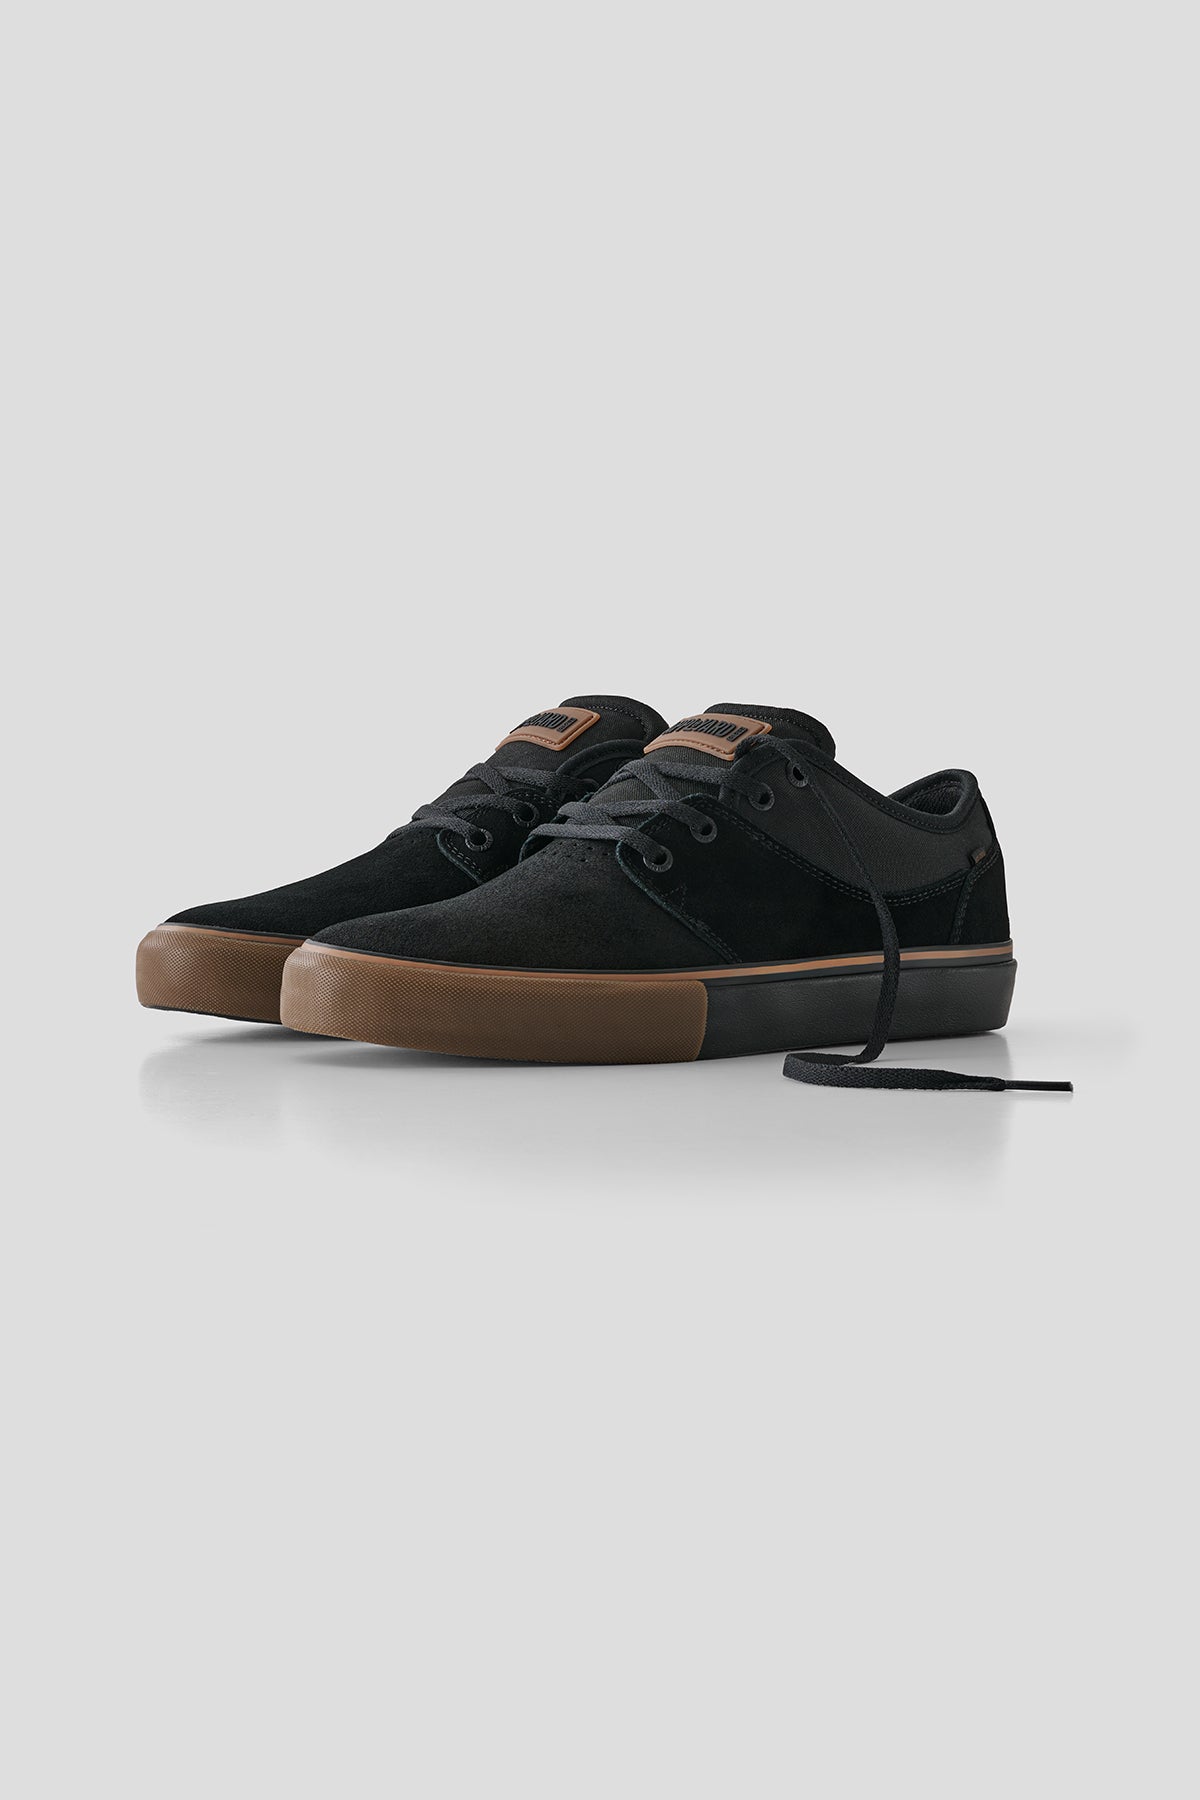 Mahalo - Noir/Gomme - skateboard Chaussures